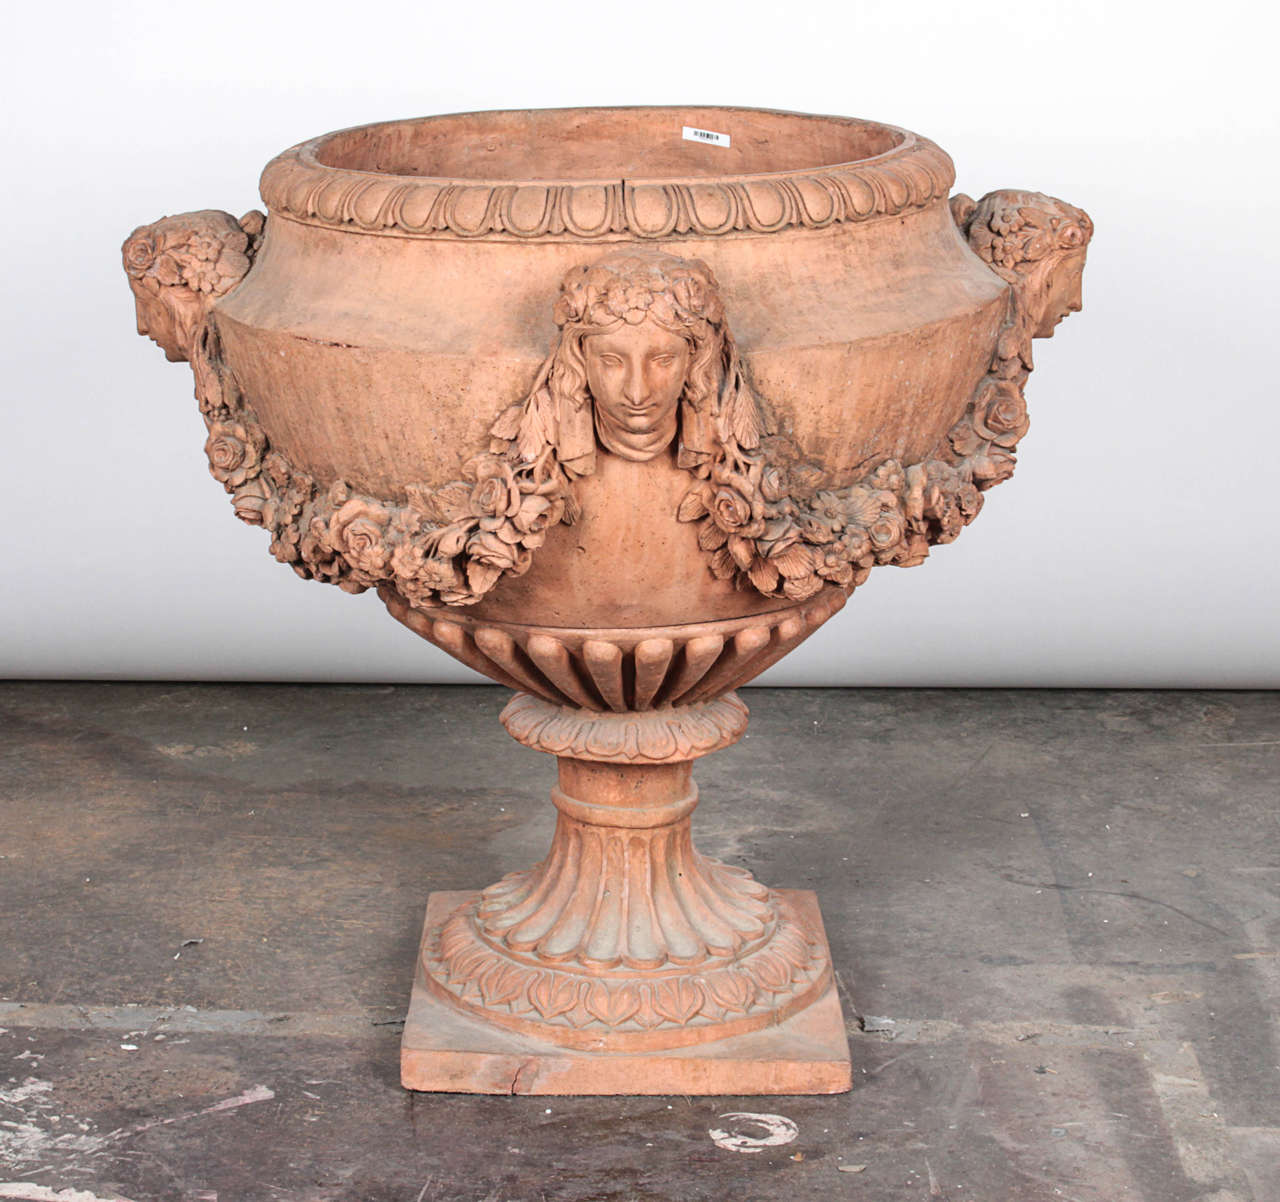 Pair of terracotta urns with the faces of a maiden on four sides. Garlands of terracotta florals connect each maiden. Each urn is consists of two pieces: a base and a bowl which rests on top.

*Not available for sale or to ship in the state of